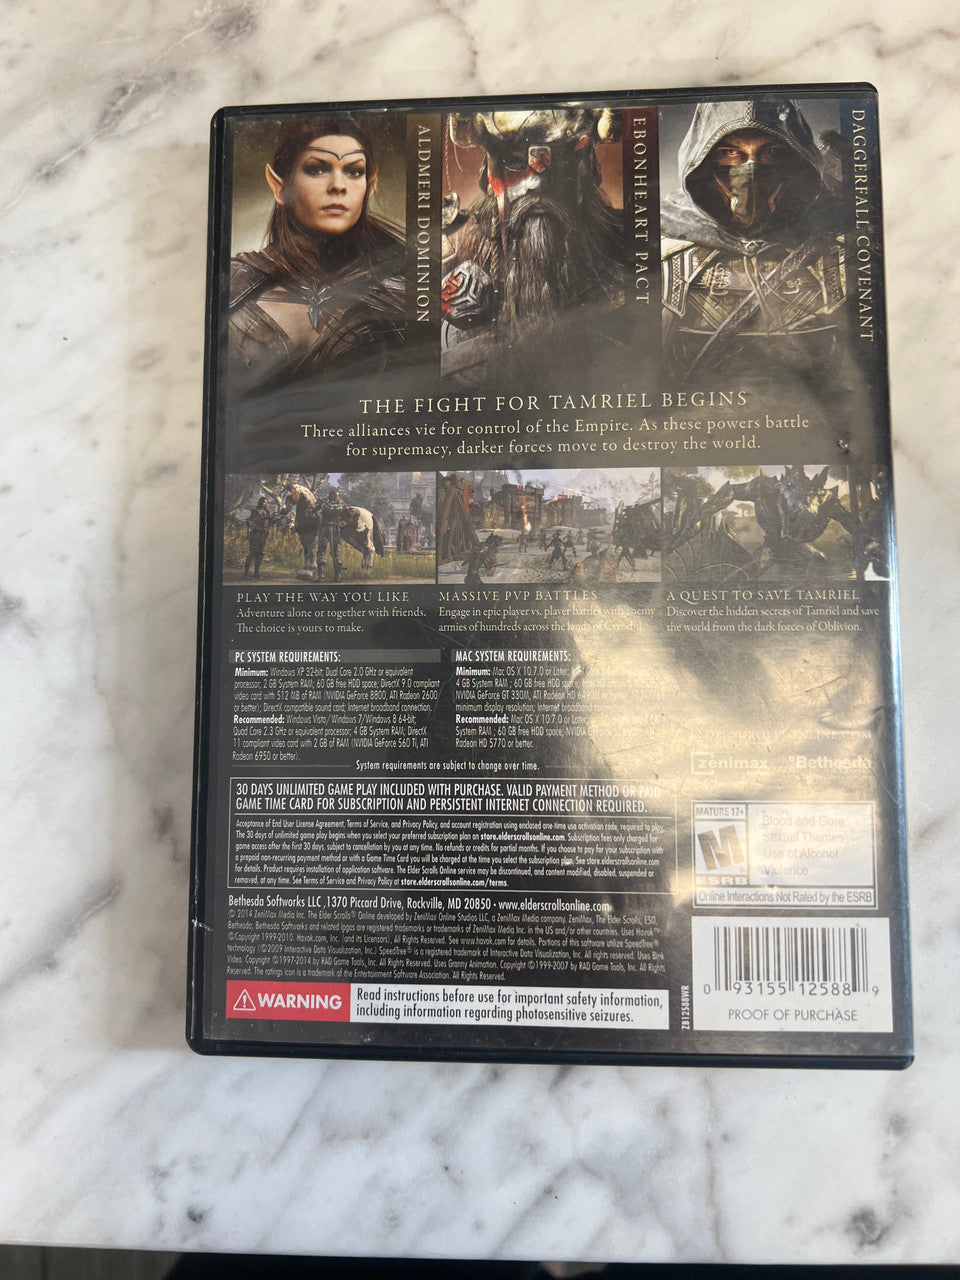 Elder Scrolls PC online Game 2014 Complete with Manual and 4 discs